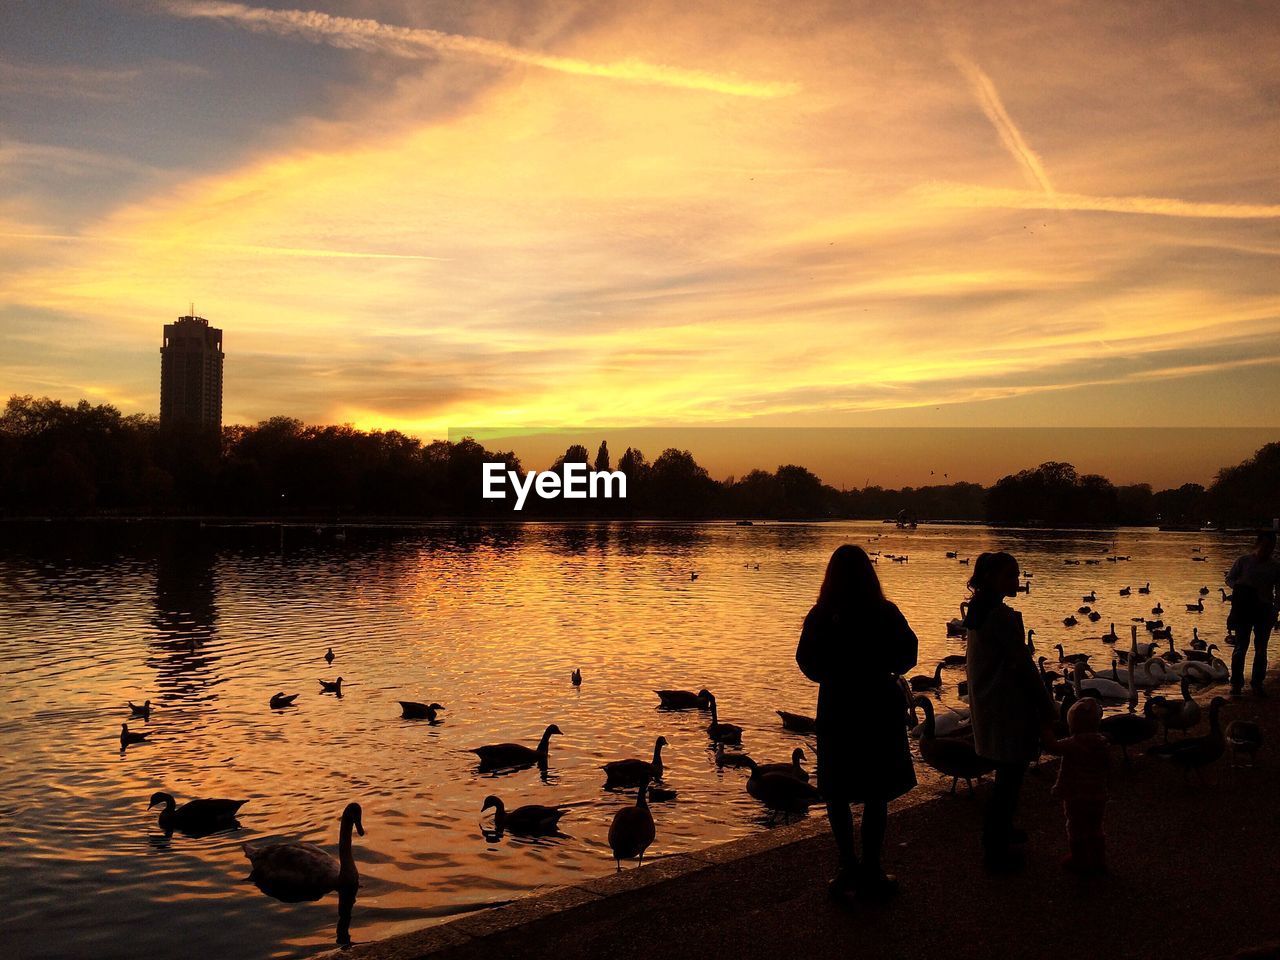 Birds swimming in lake by people against cloudy sky at hyde park during sunset